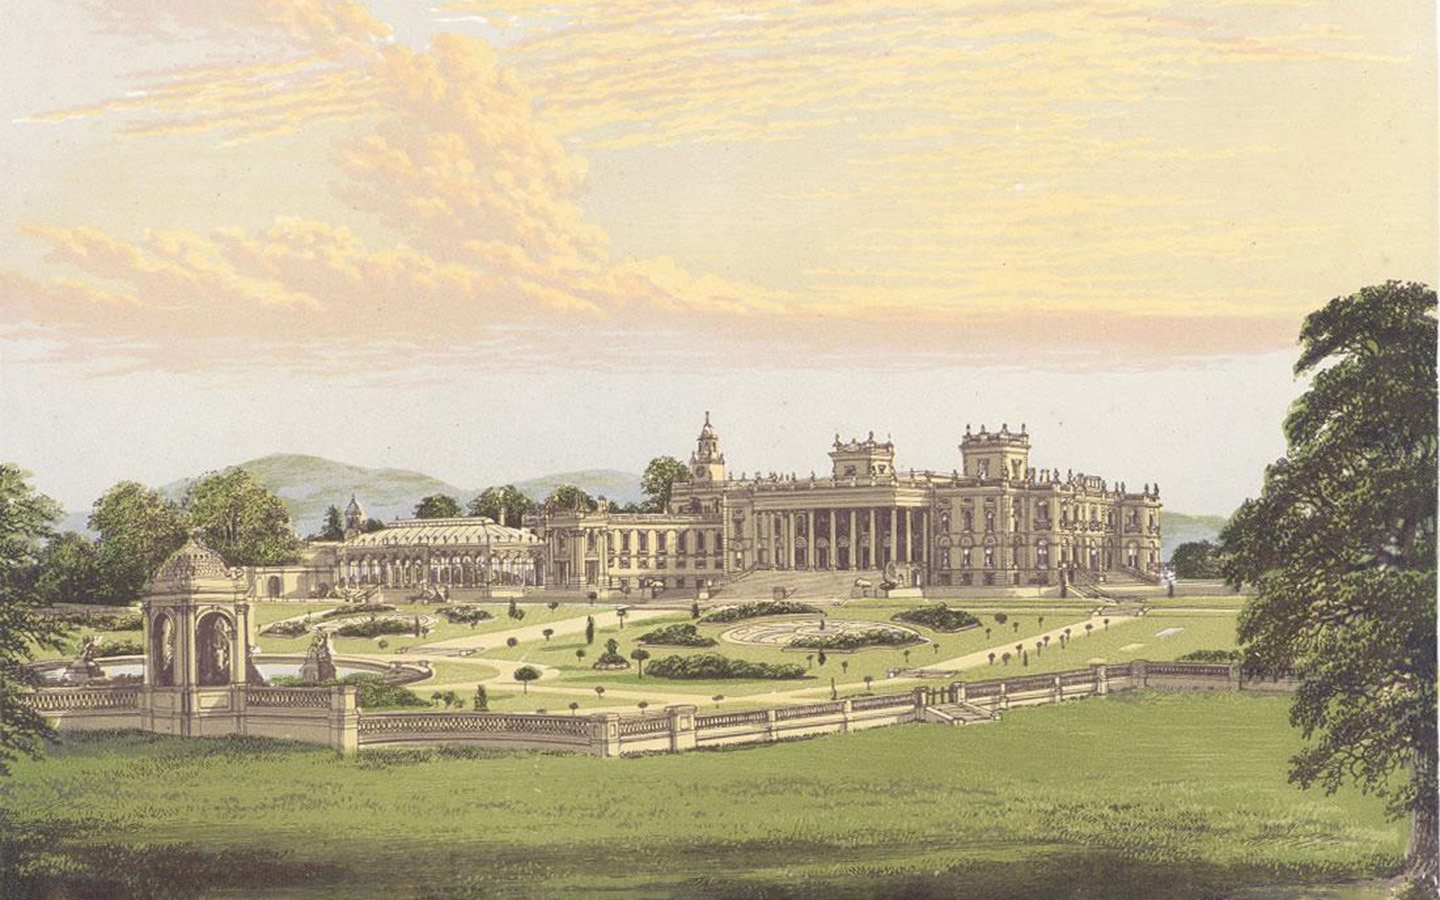 Illustration of Witley Court in 1880 